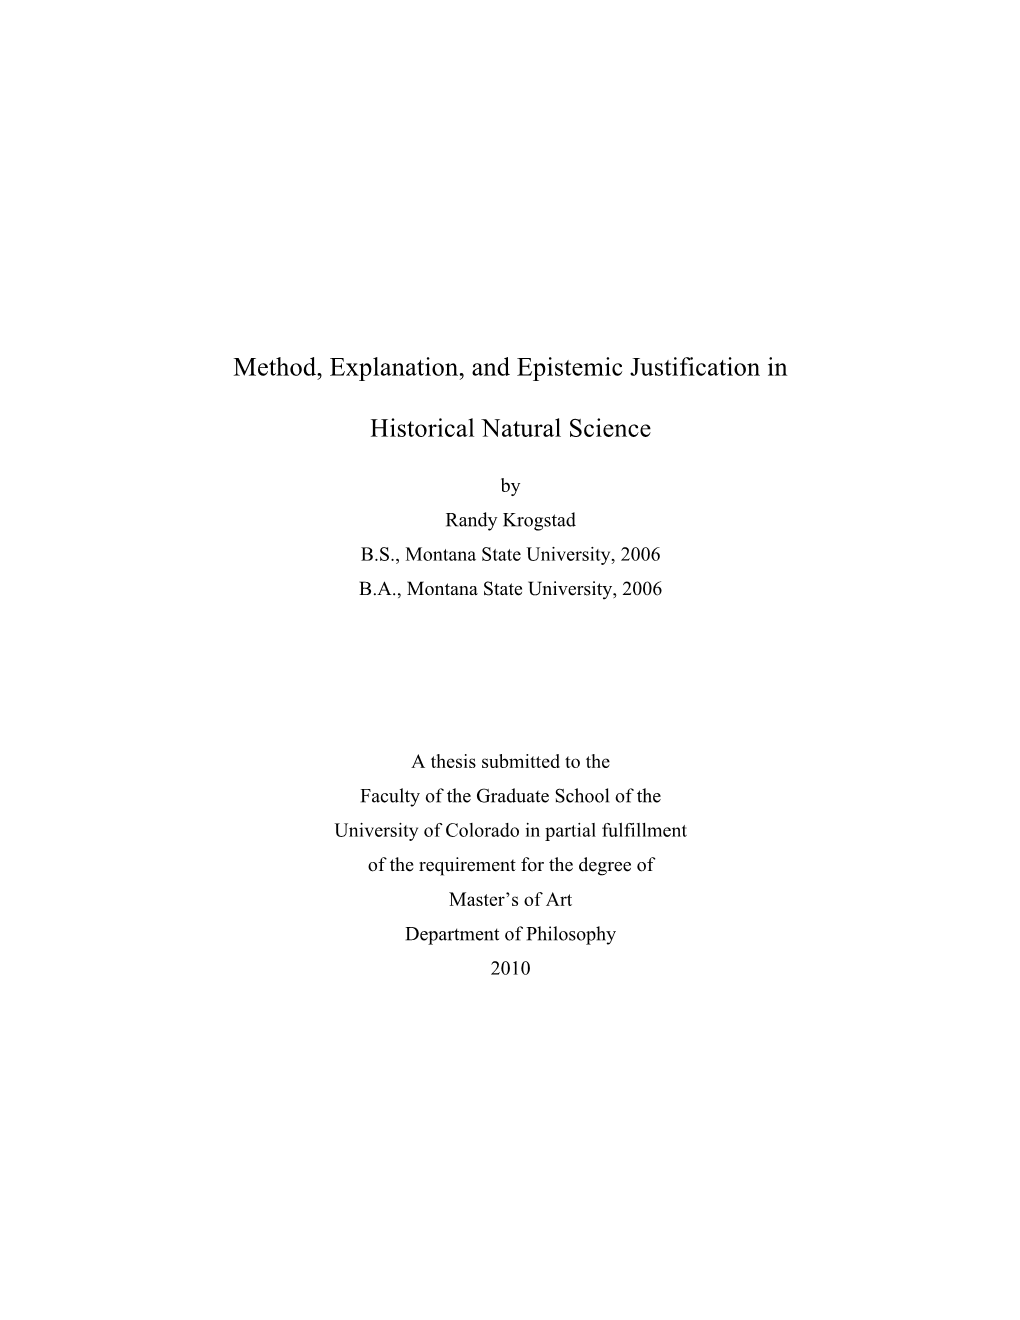 Method, Explanation, and Epistemic Justification in Historical Natural Science Written by Randy Krogstad Has Been Approved for the Department of Philosophy